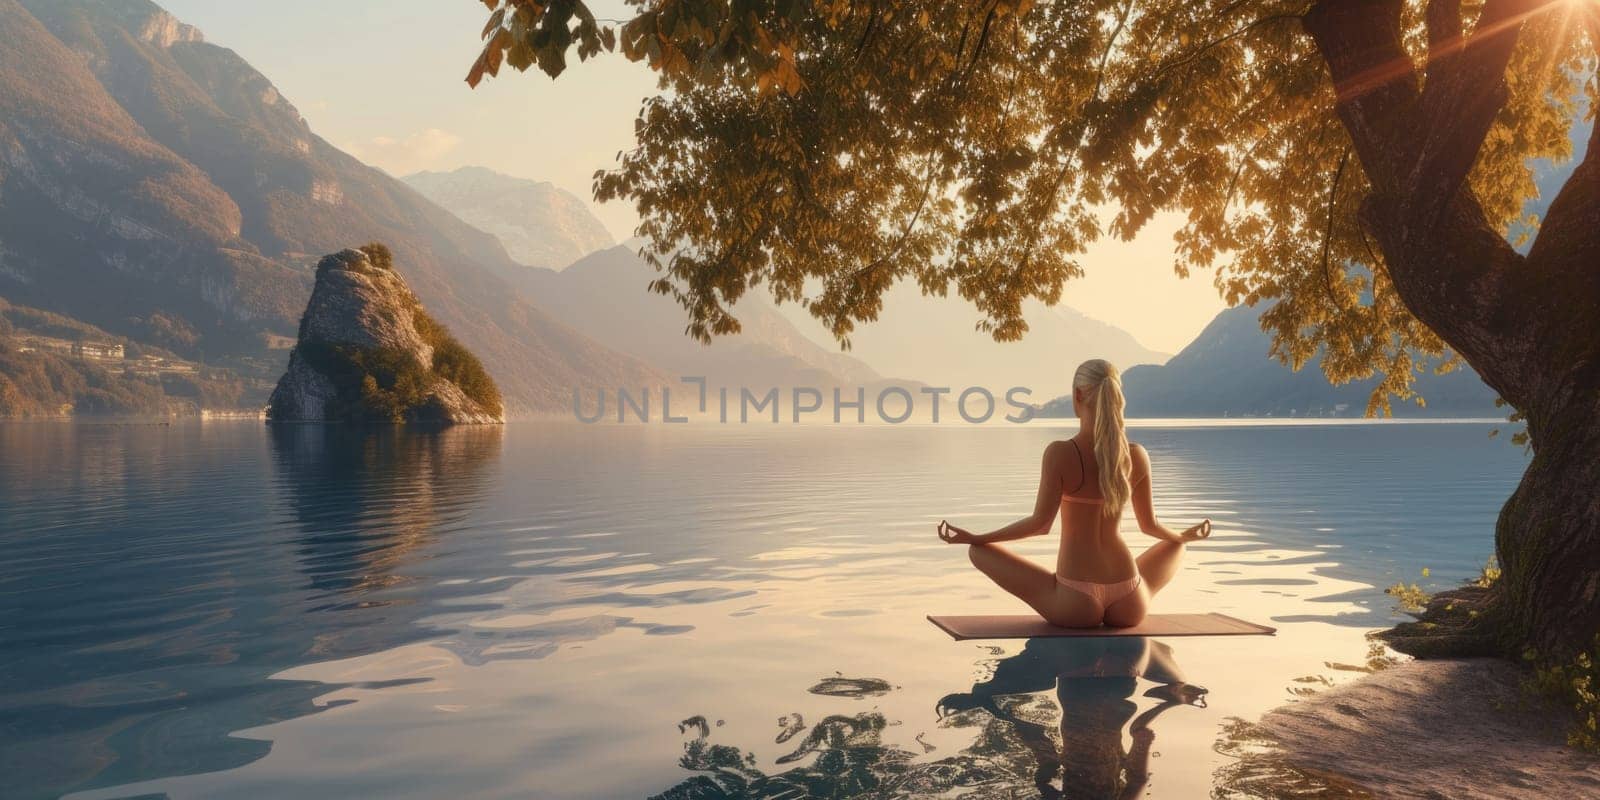 A woman calmly sits on a yoga mat positioned in the water.